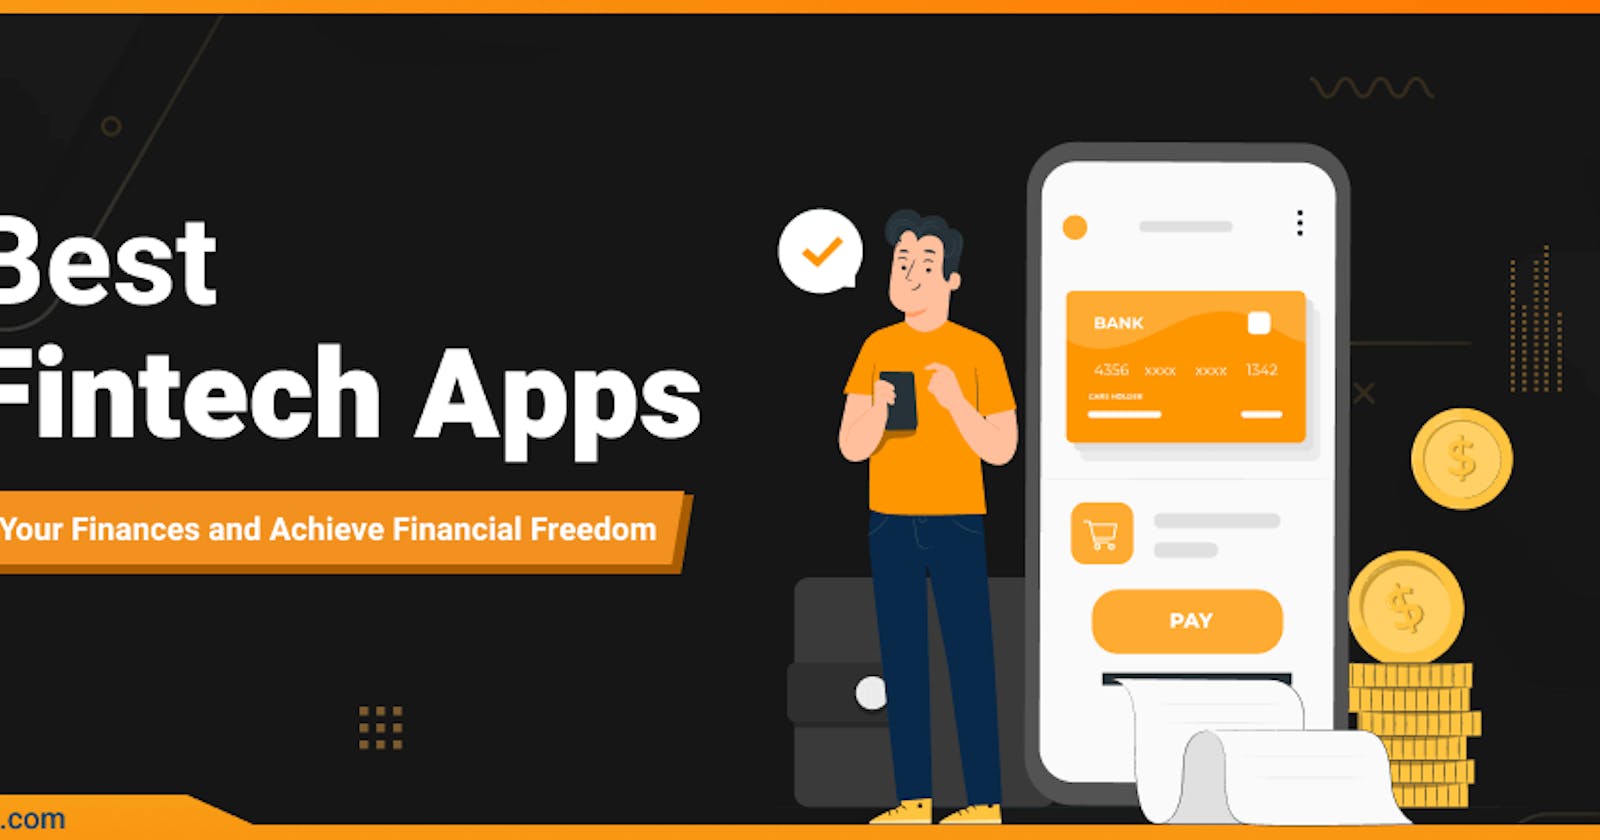 8 Best Fintech Apps to Streamline Your Finances and Achieve Financial Freedom